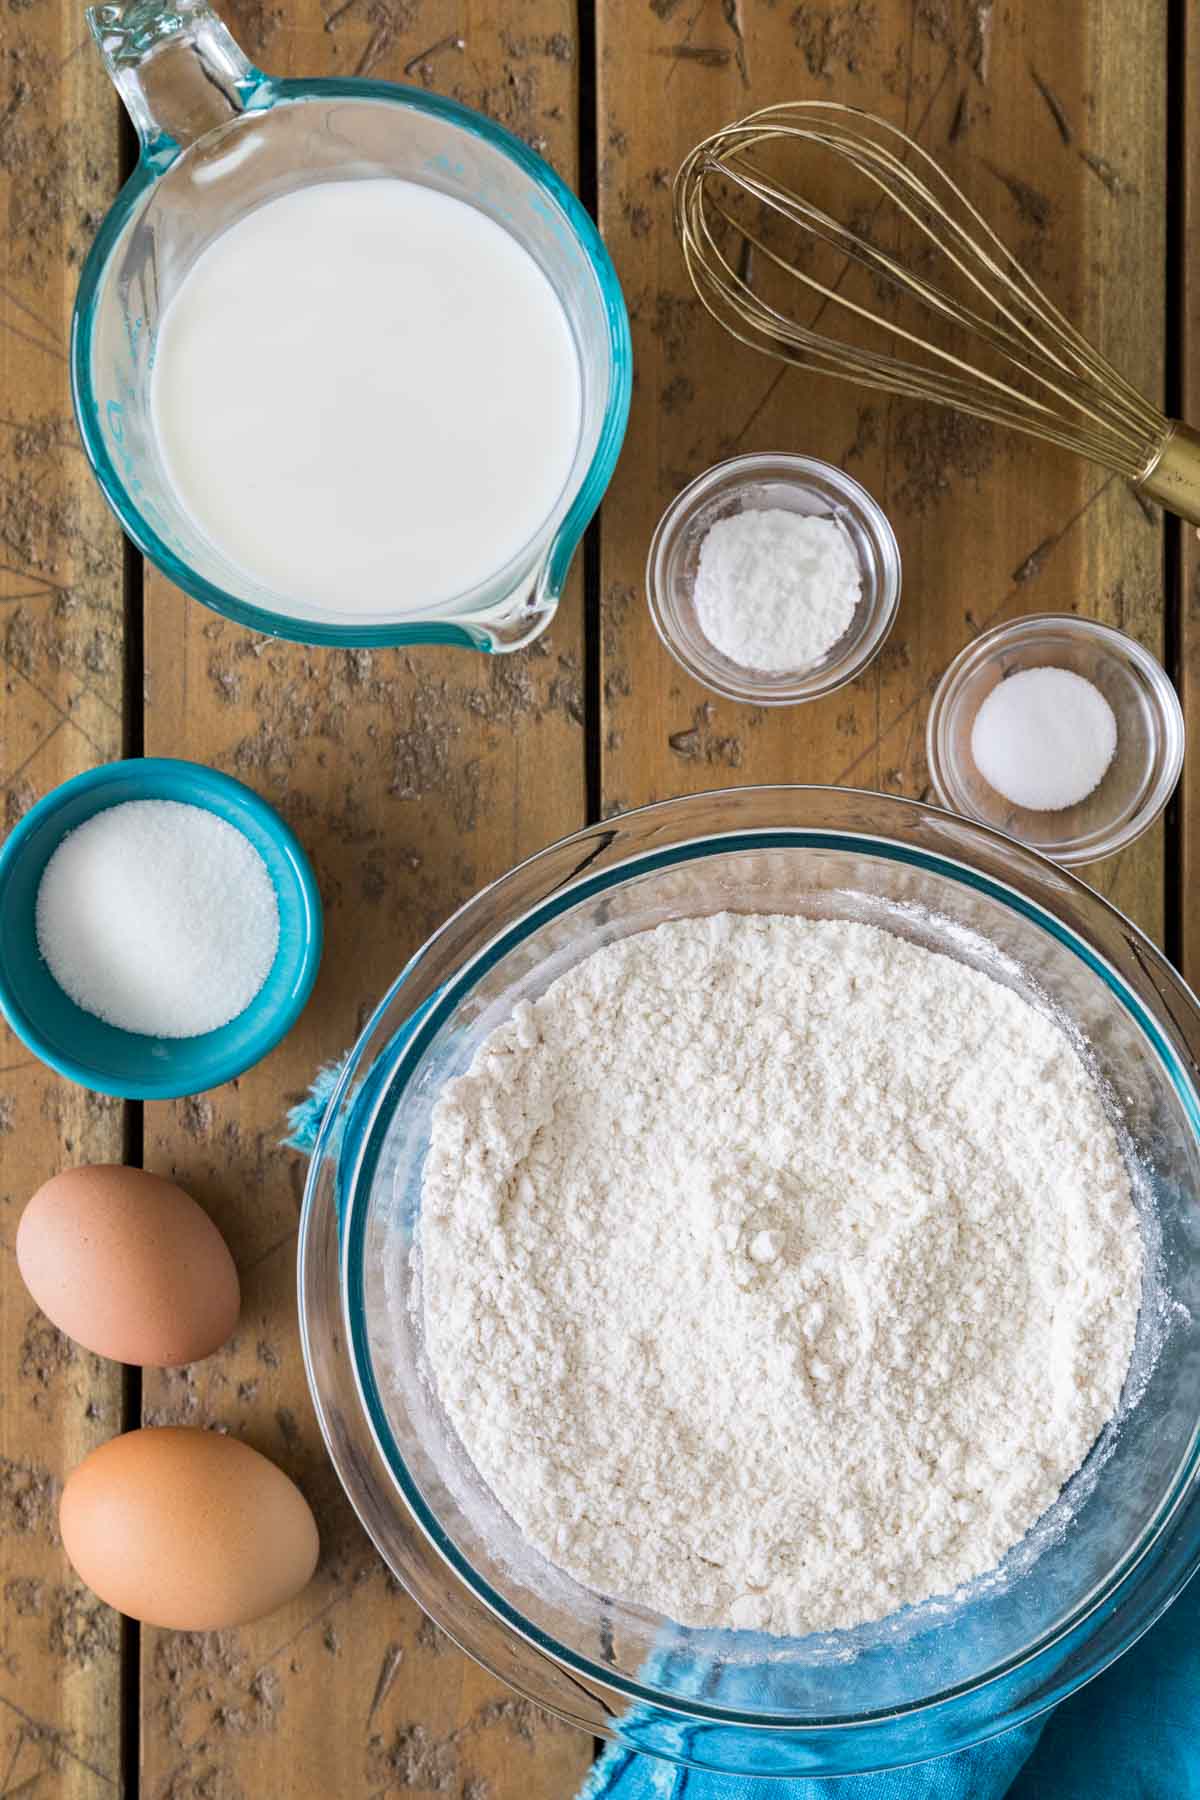 overhead view of ingredients including flour, eggs, milk, sugar, and more